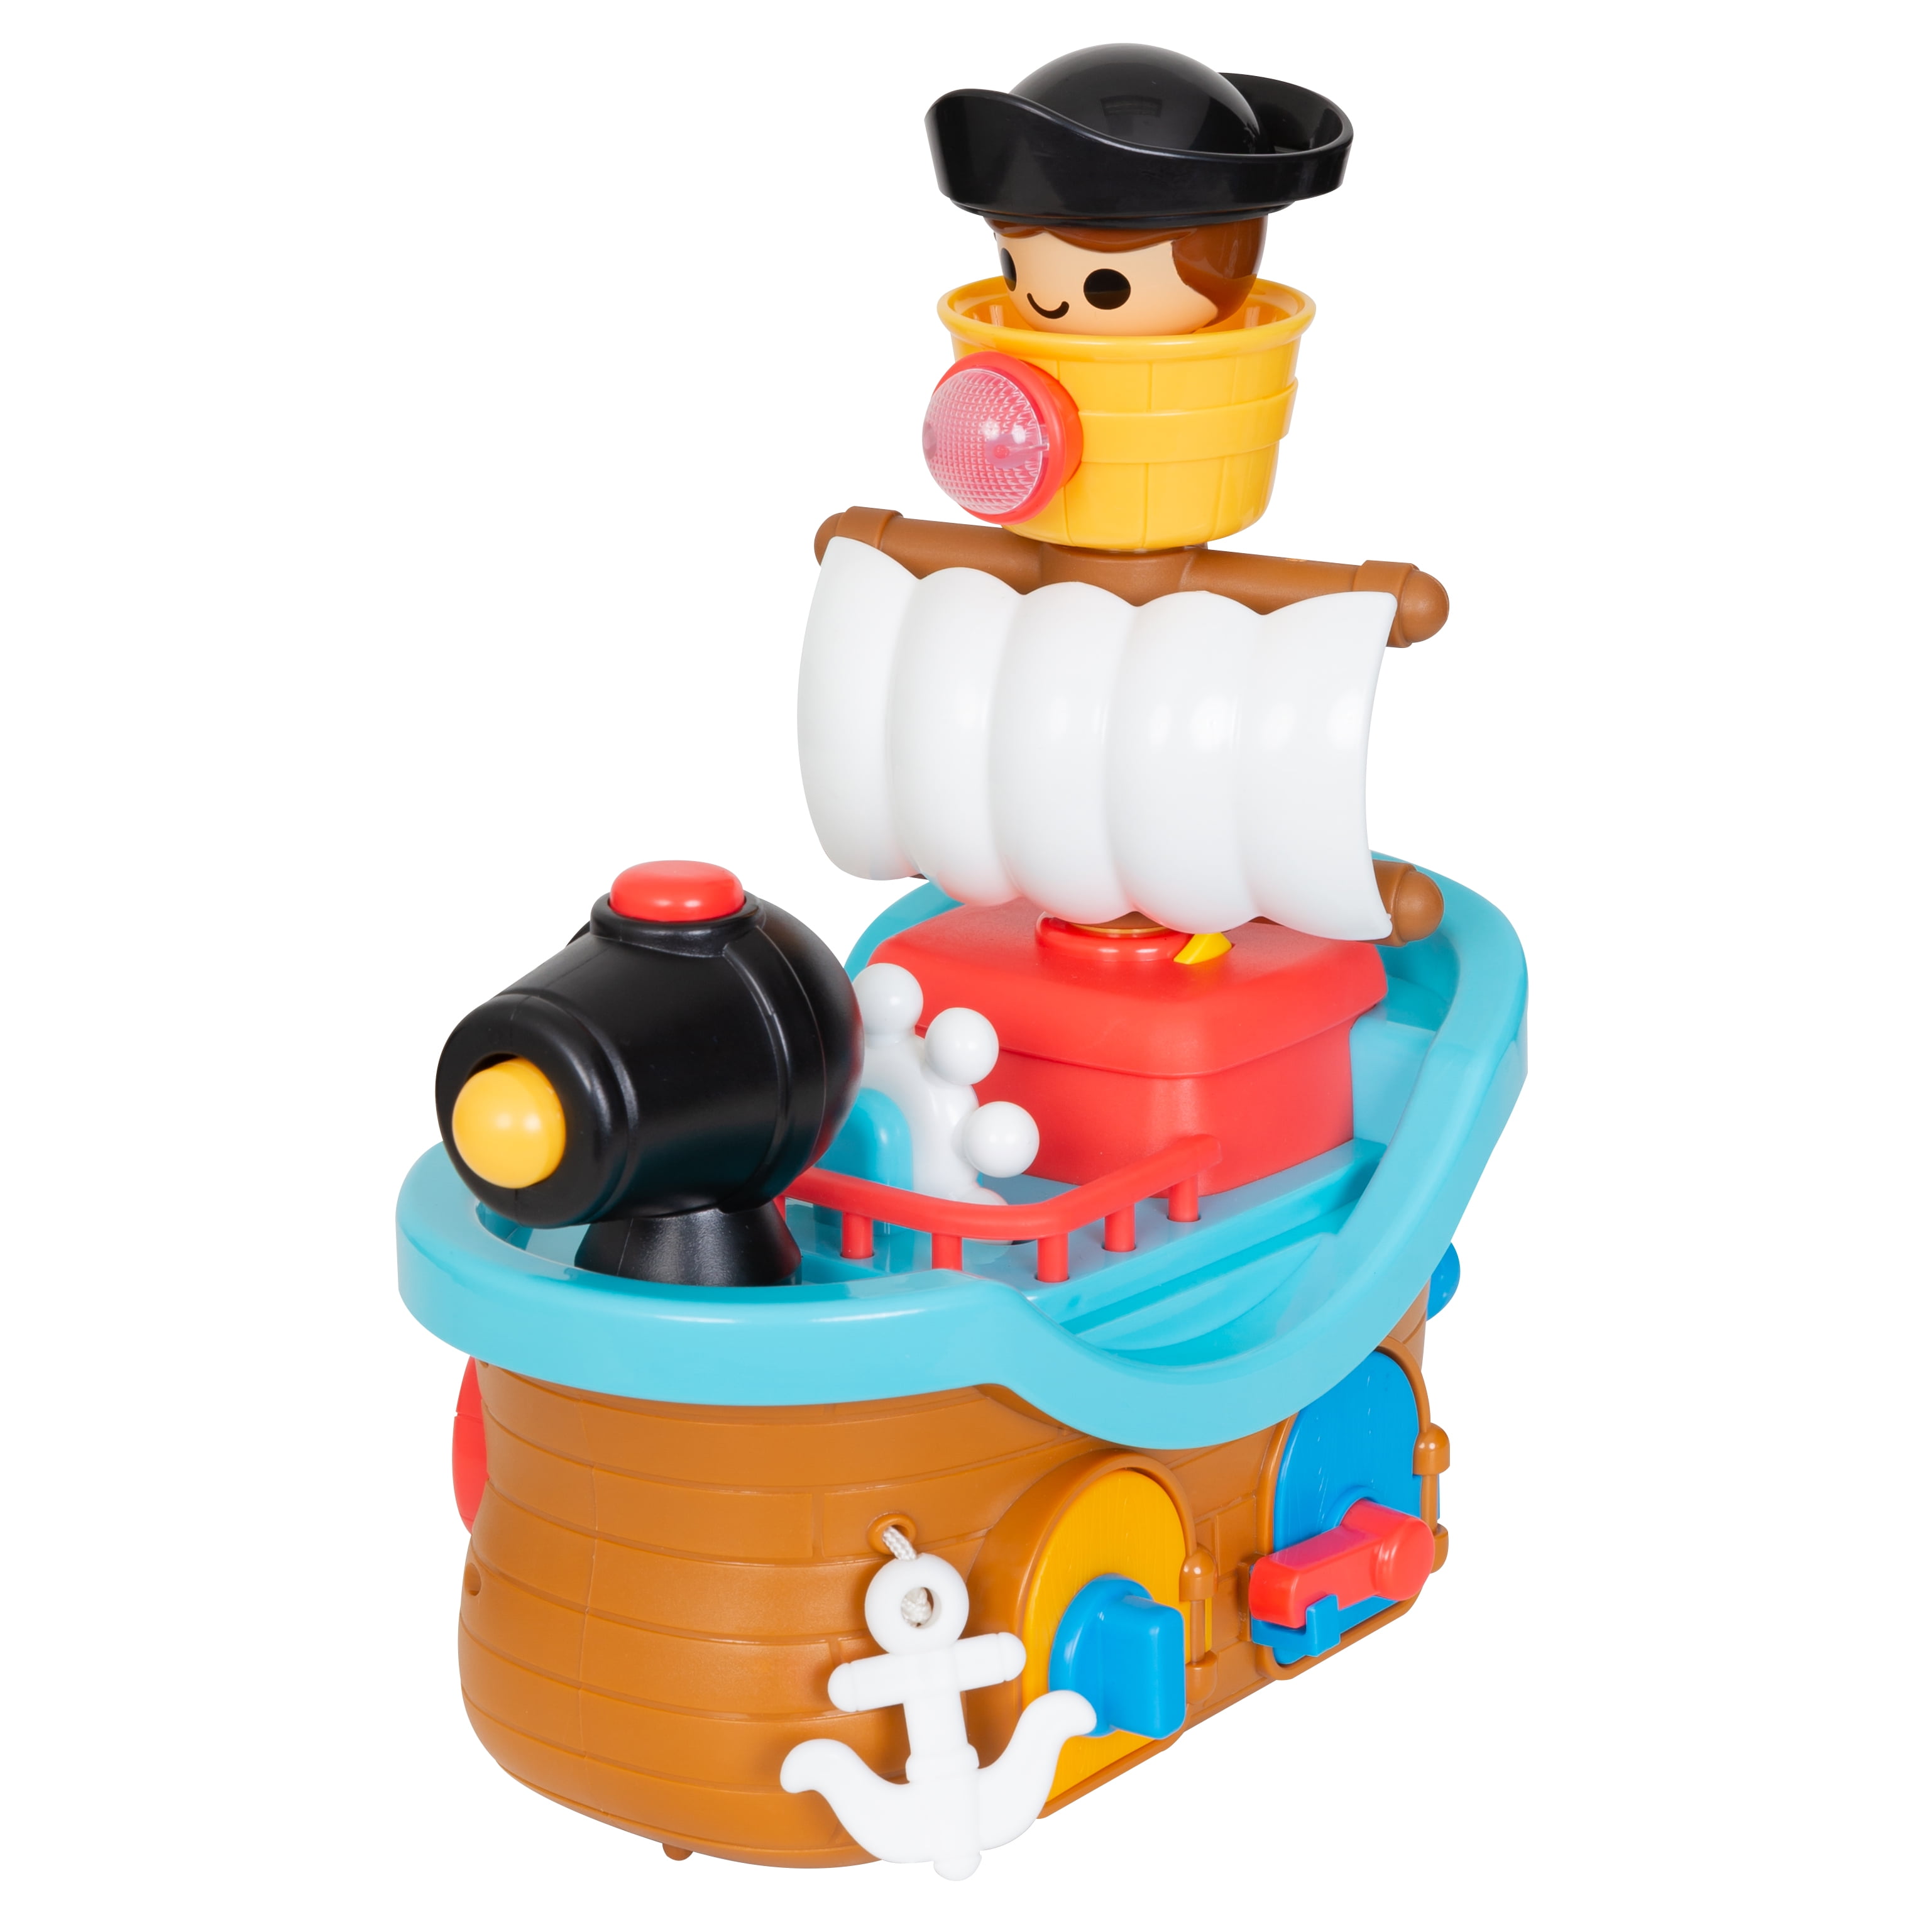 Baby Trend Smart Ship Toy w/ Lights, Sounds and Mechanical Activations $6.25 + Free S&H w/ Prime, Walmart+ or $35+